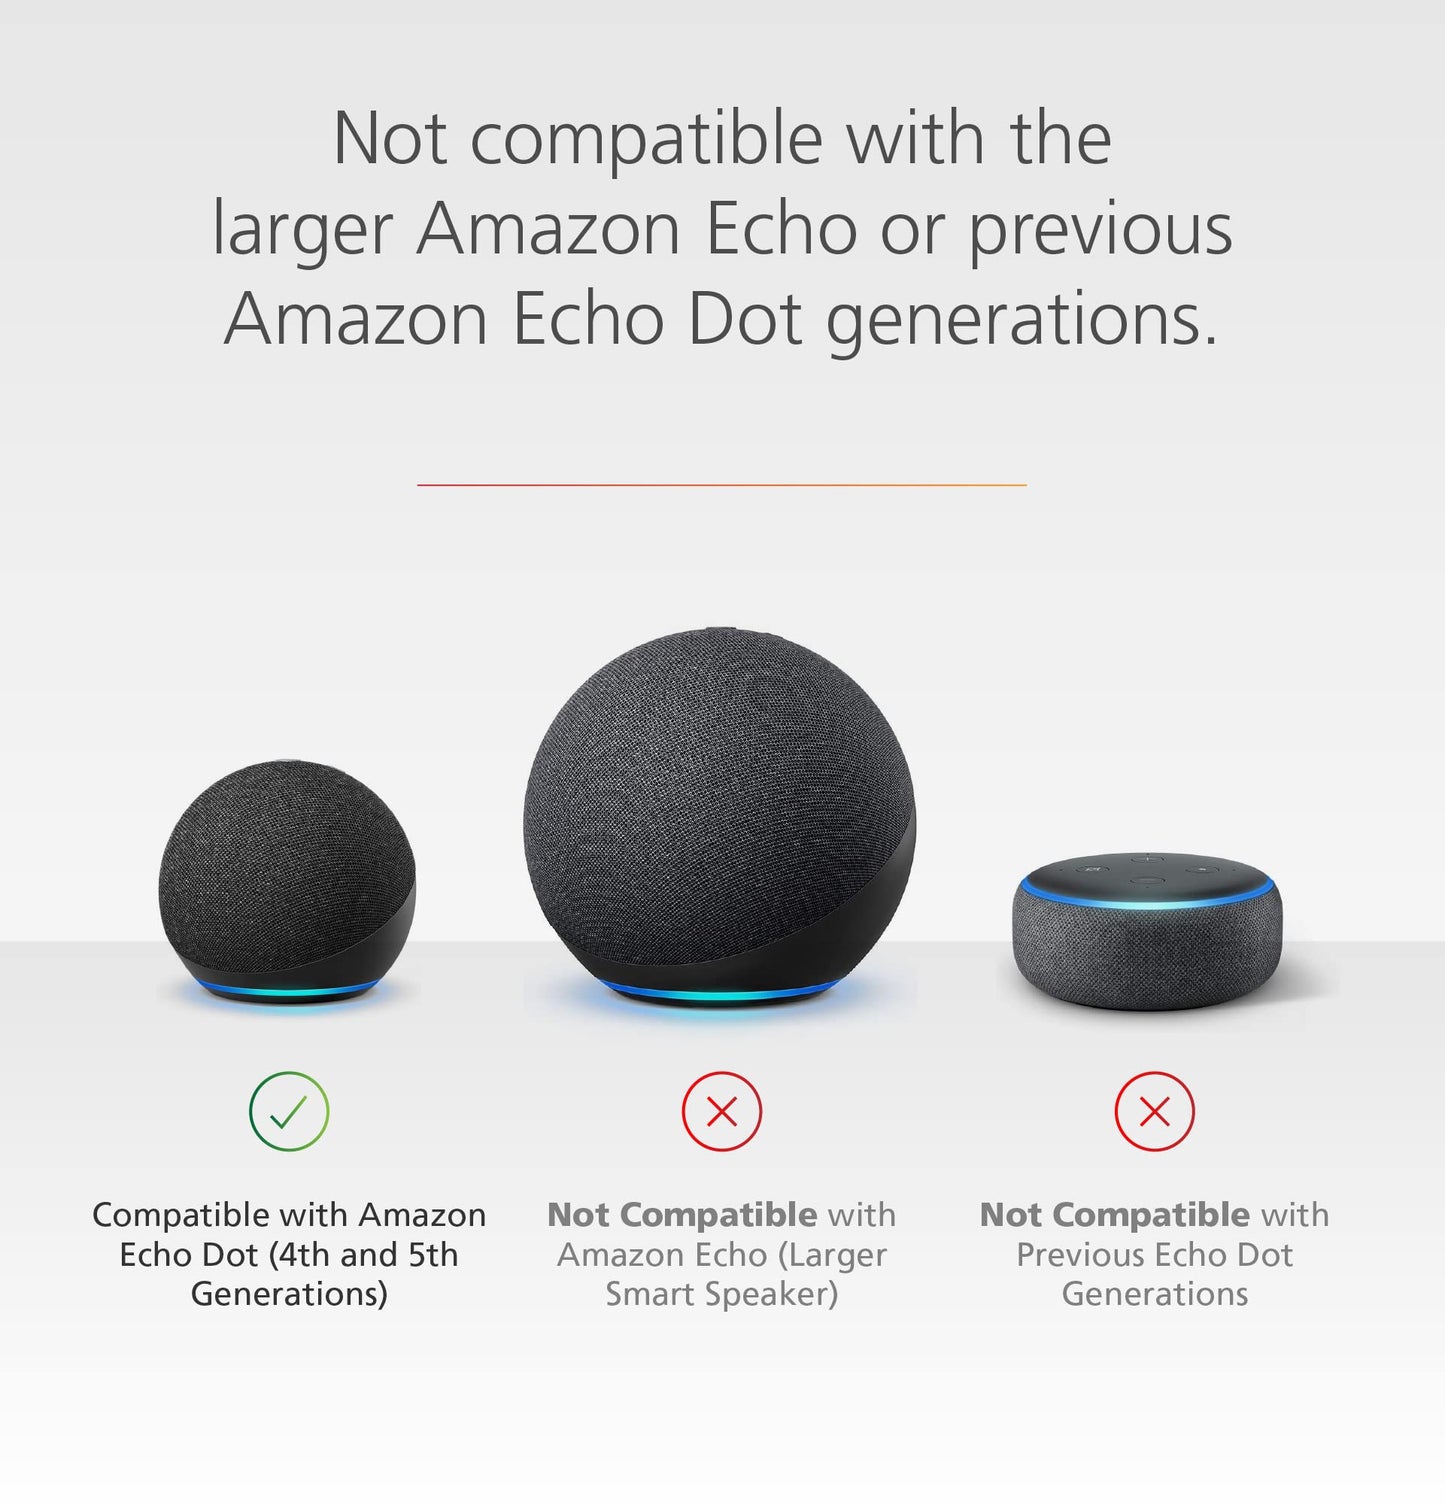 All-New, Made for Amazon Battery Base, for Echo Dot (5th generation)